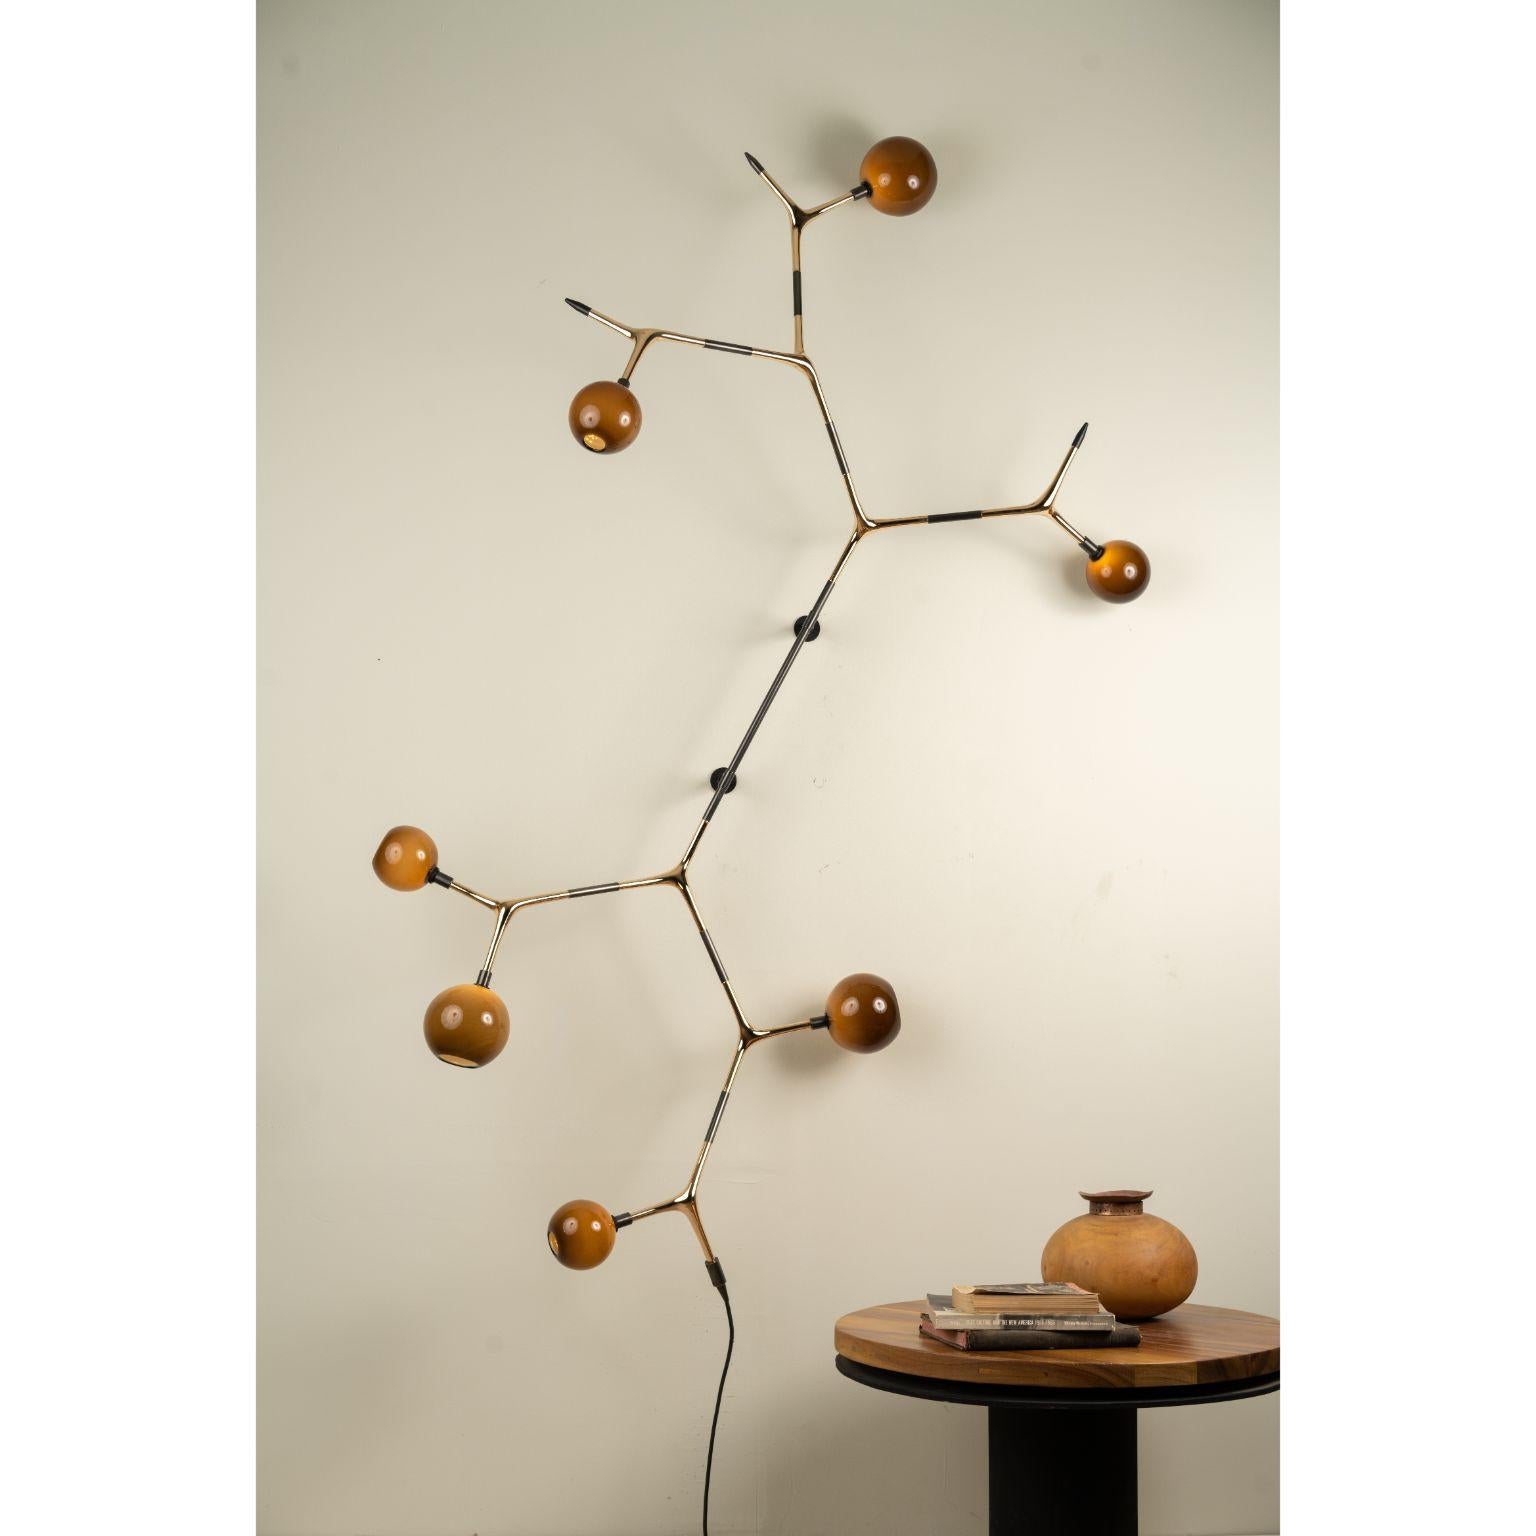 Coffee and Polished Bronze Campamocha Climbing Wall Lamp by Isabel Moncada
Dimensions: D 50 x W 130 x H 220 cm.
Materials: Cast bronze, blown glass and turned brass.
Weight: 10.5 kg.

Campamocha is a wall climbing lamp, just like the insect it is